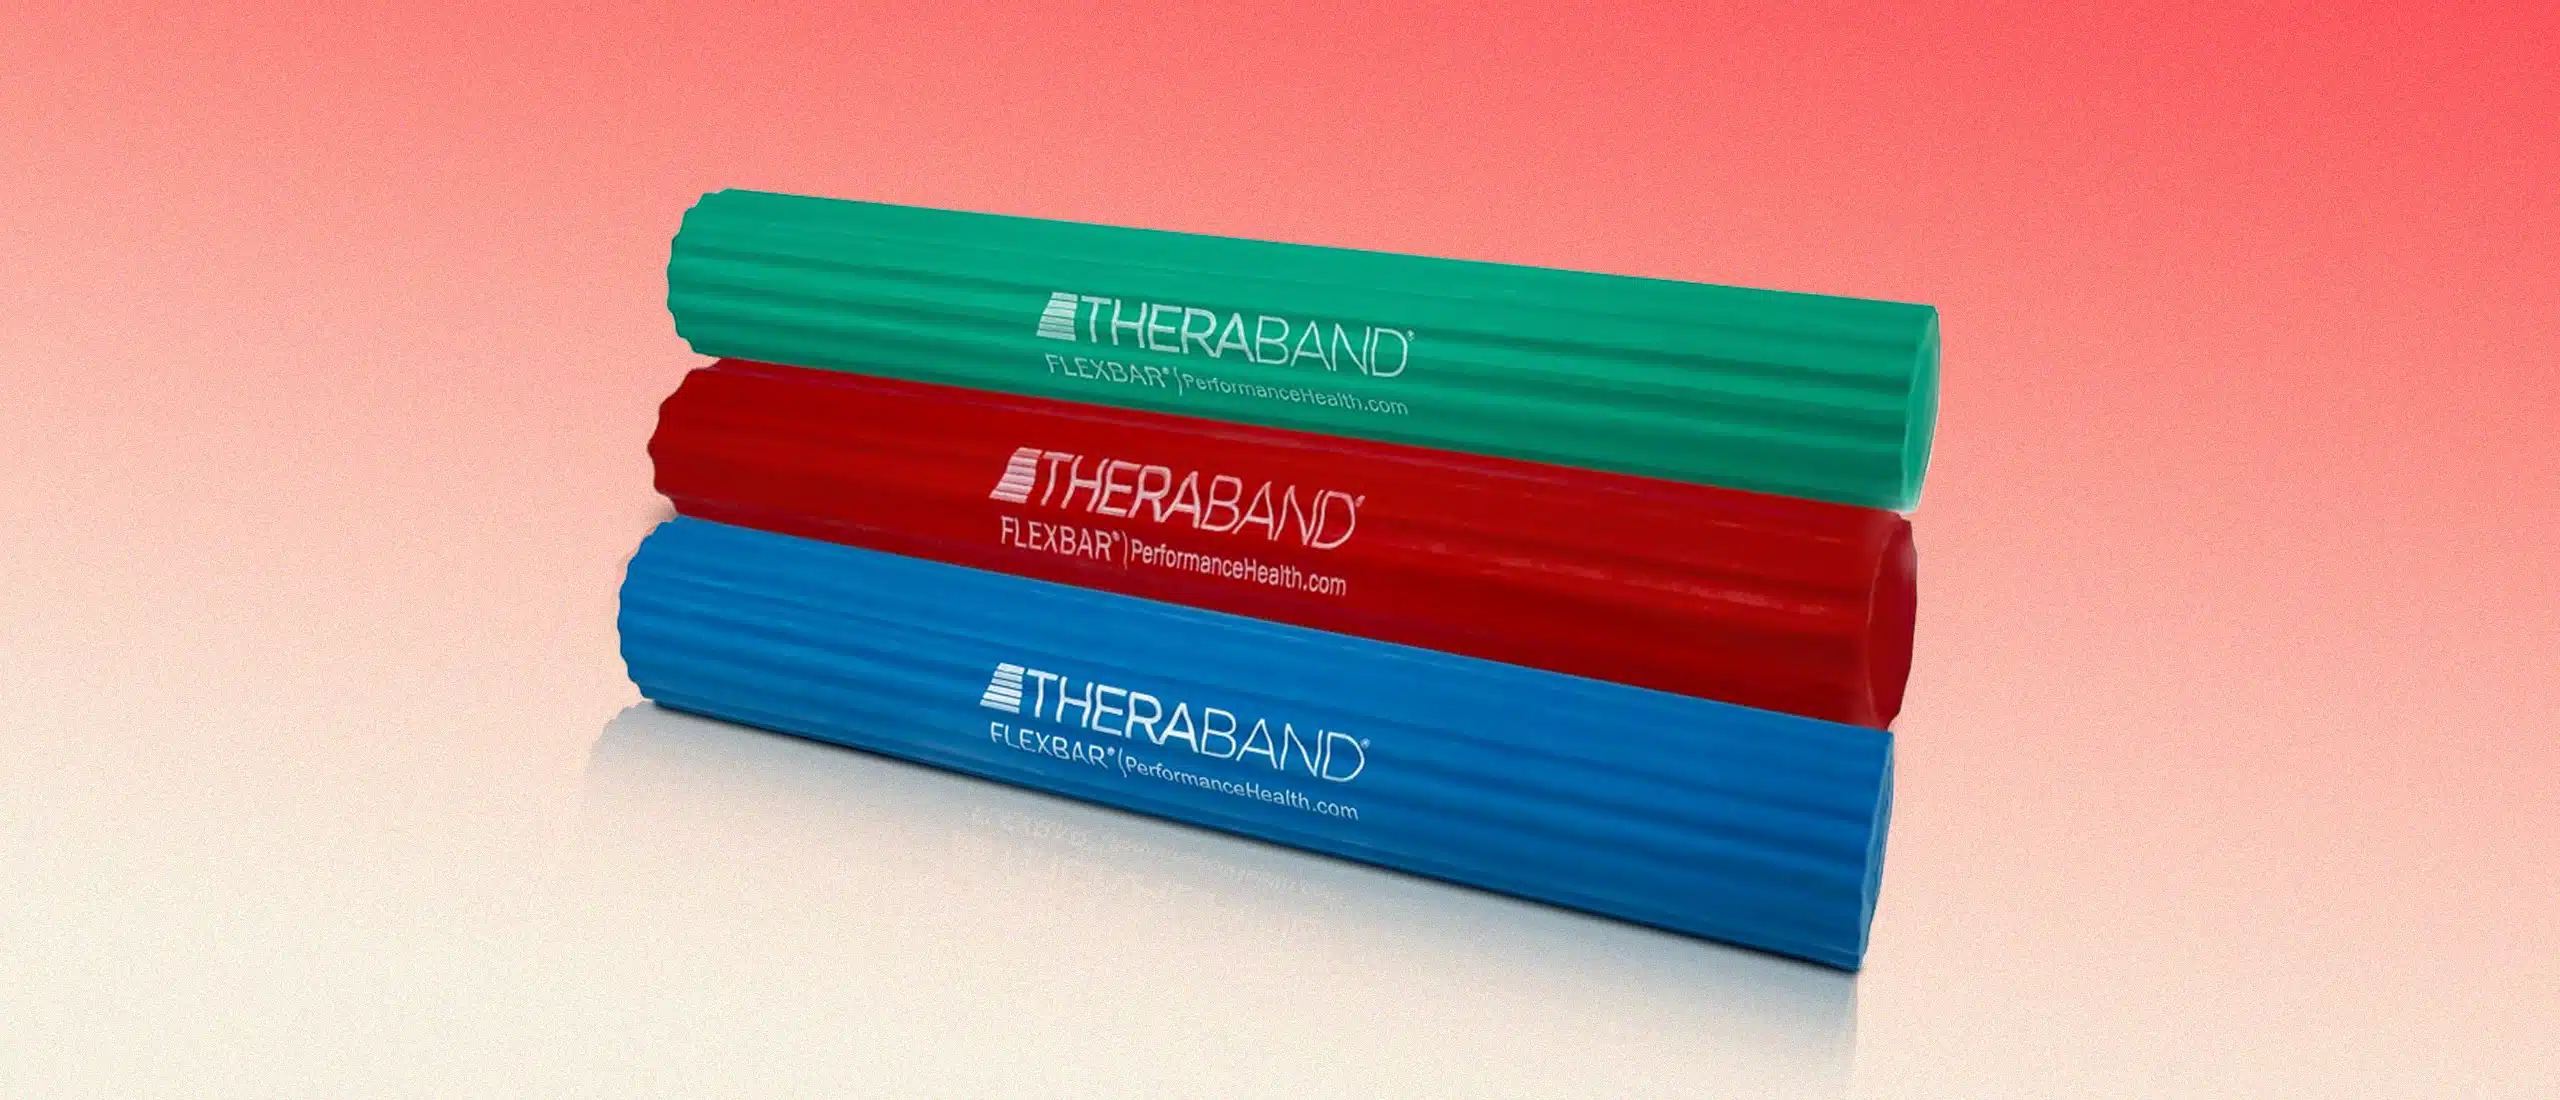 3 Theraband Flexbars on red gradient background